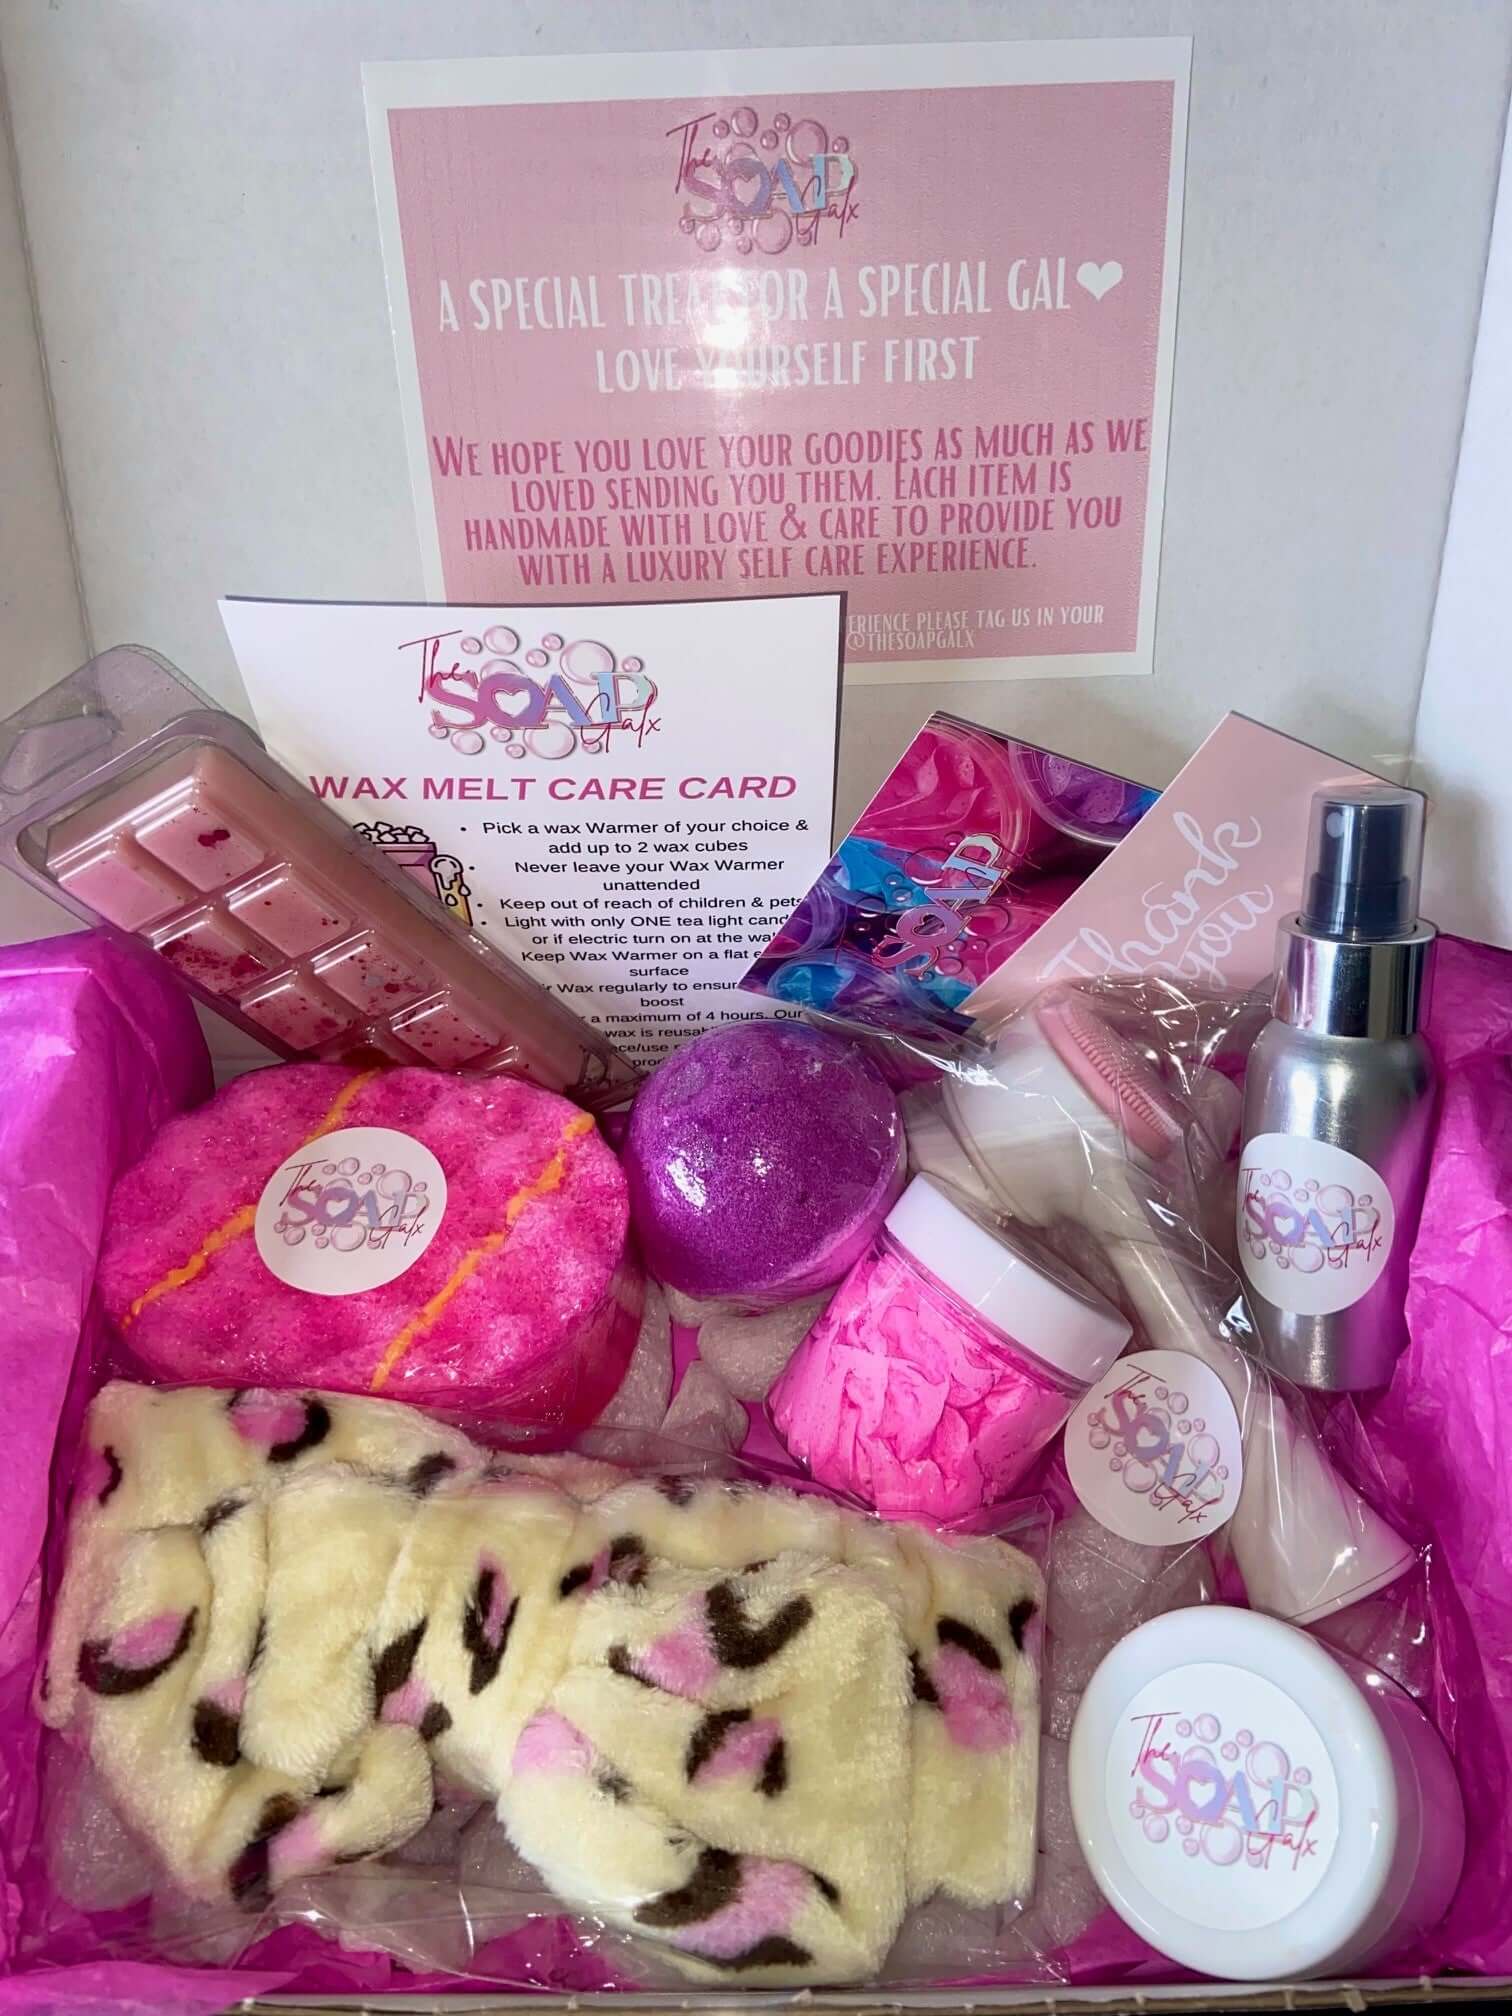 A pink Mystery Box by The Soap Gal x with a variety of skincare items inside.